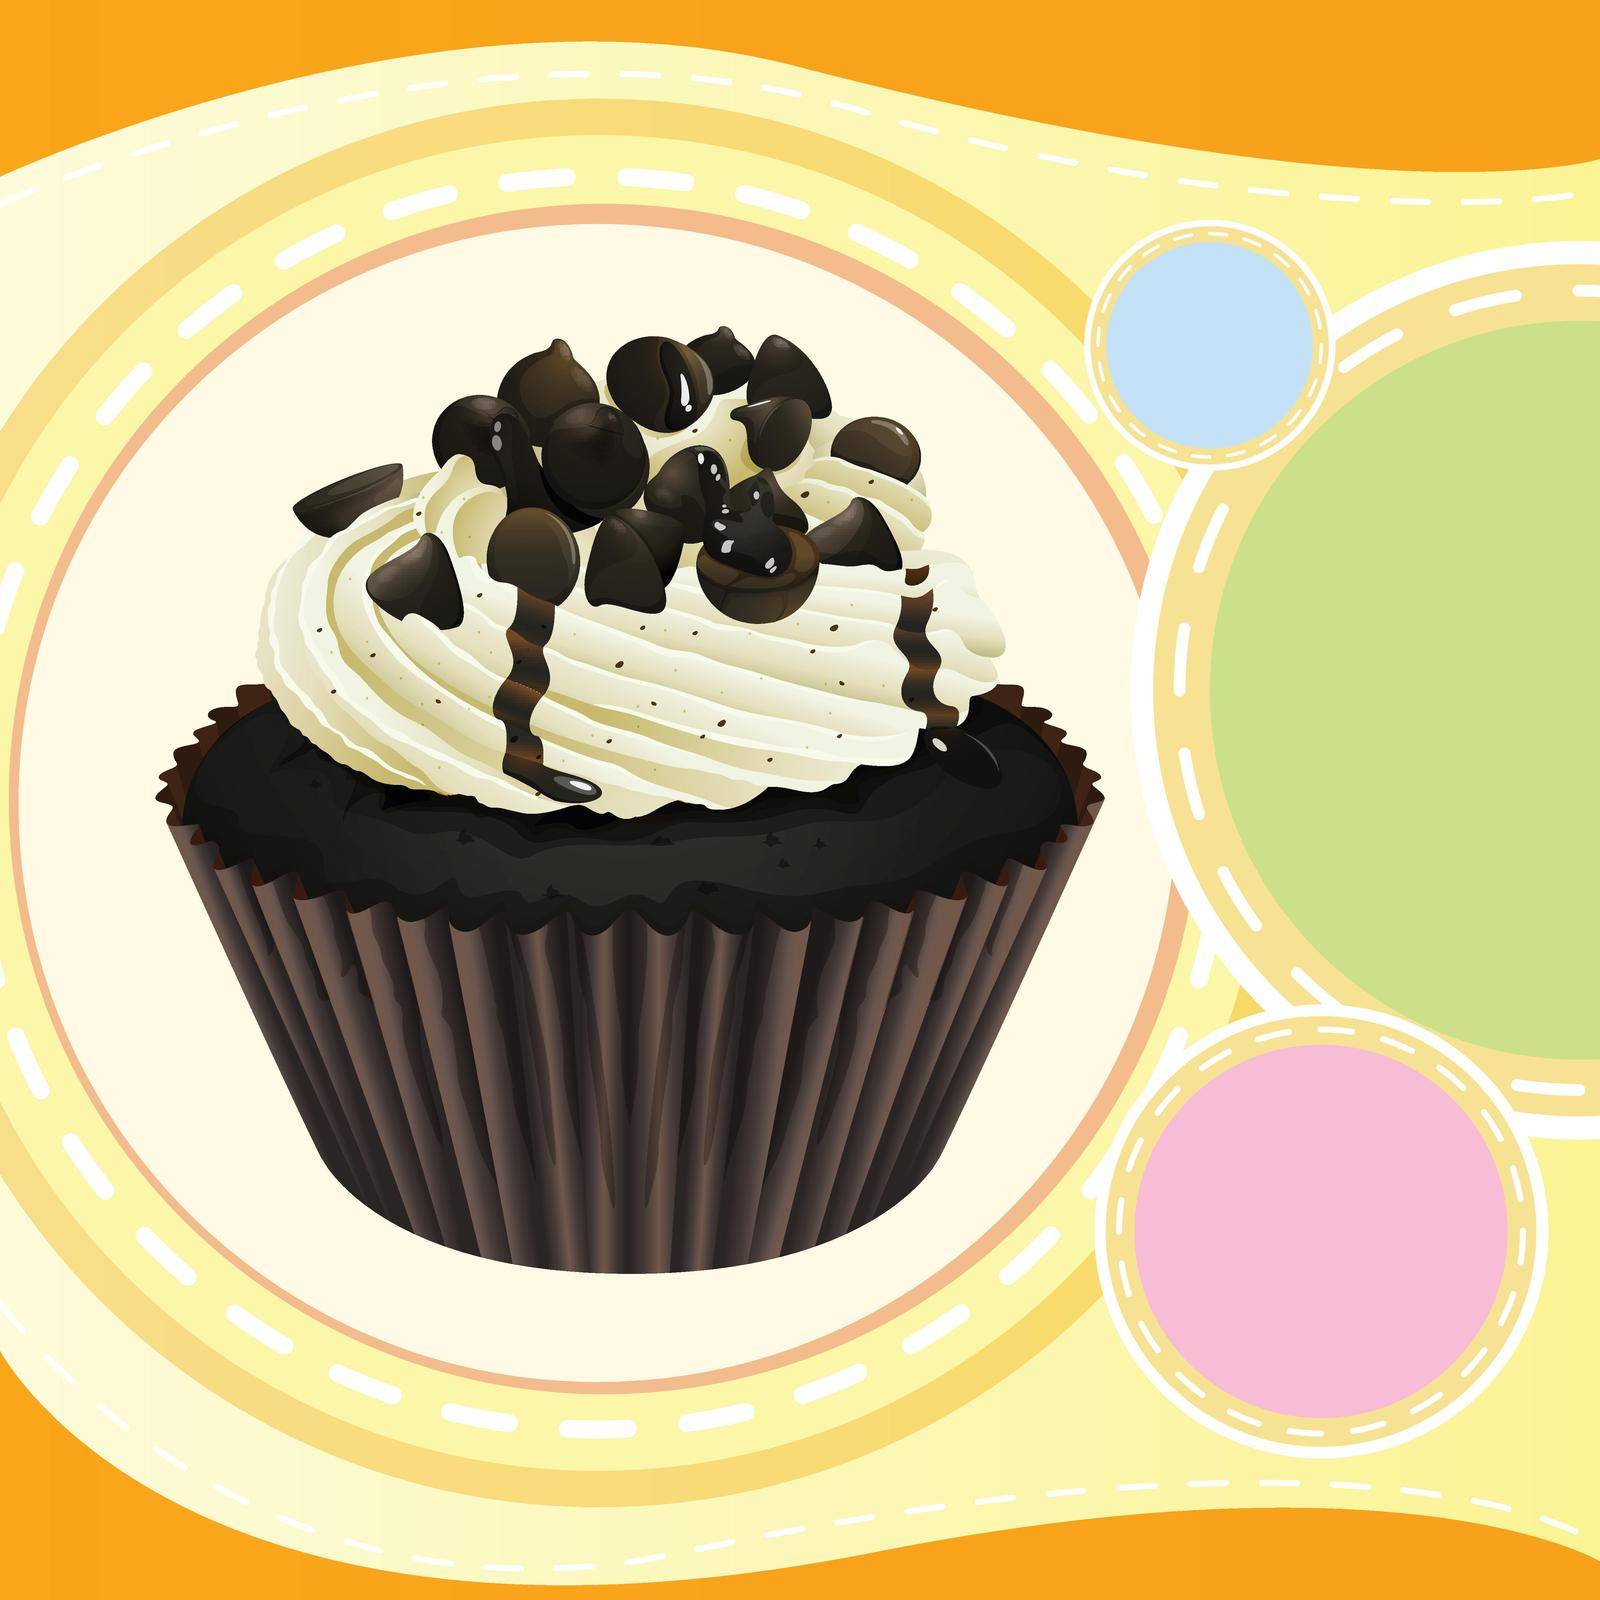 a cupcake and a wallpaper by iimages